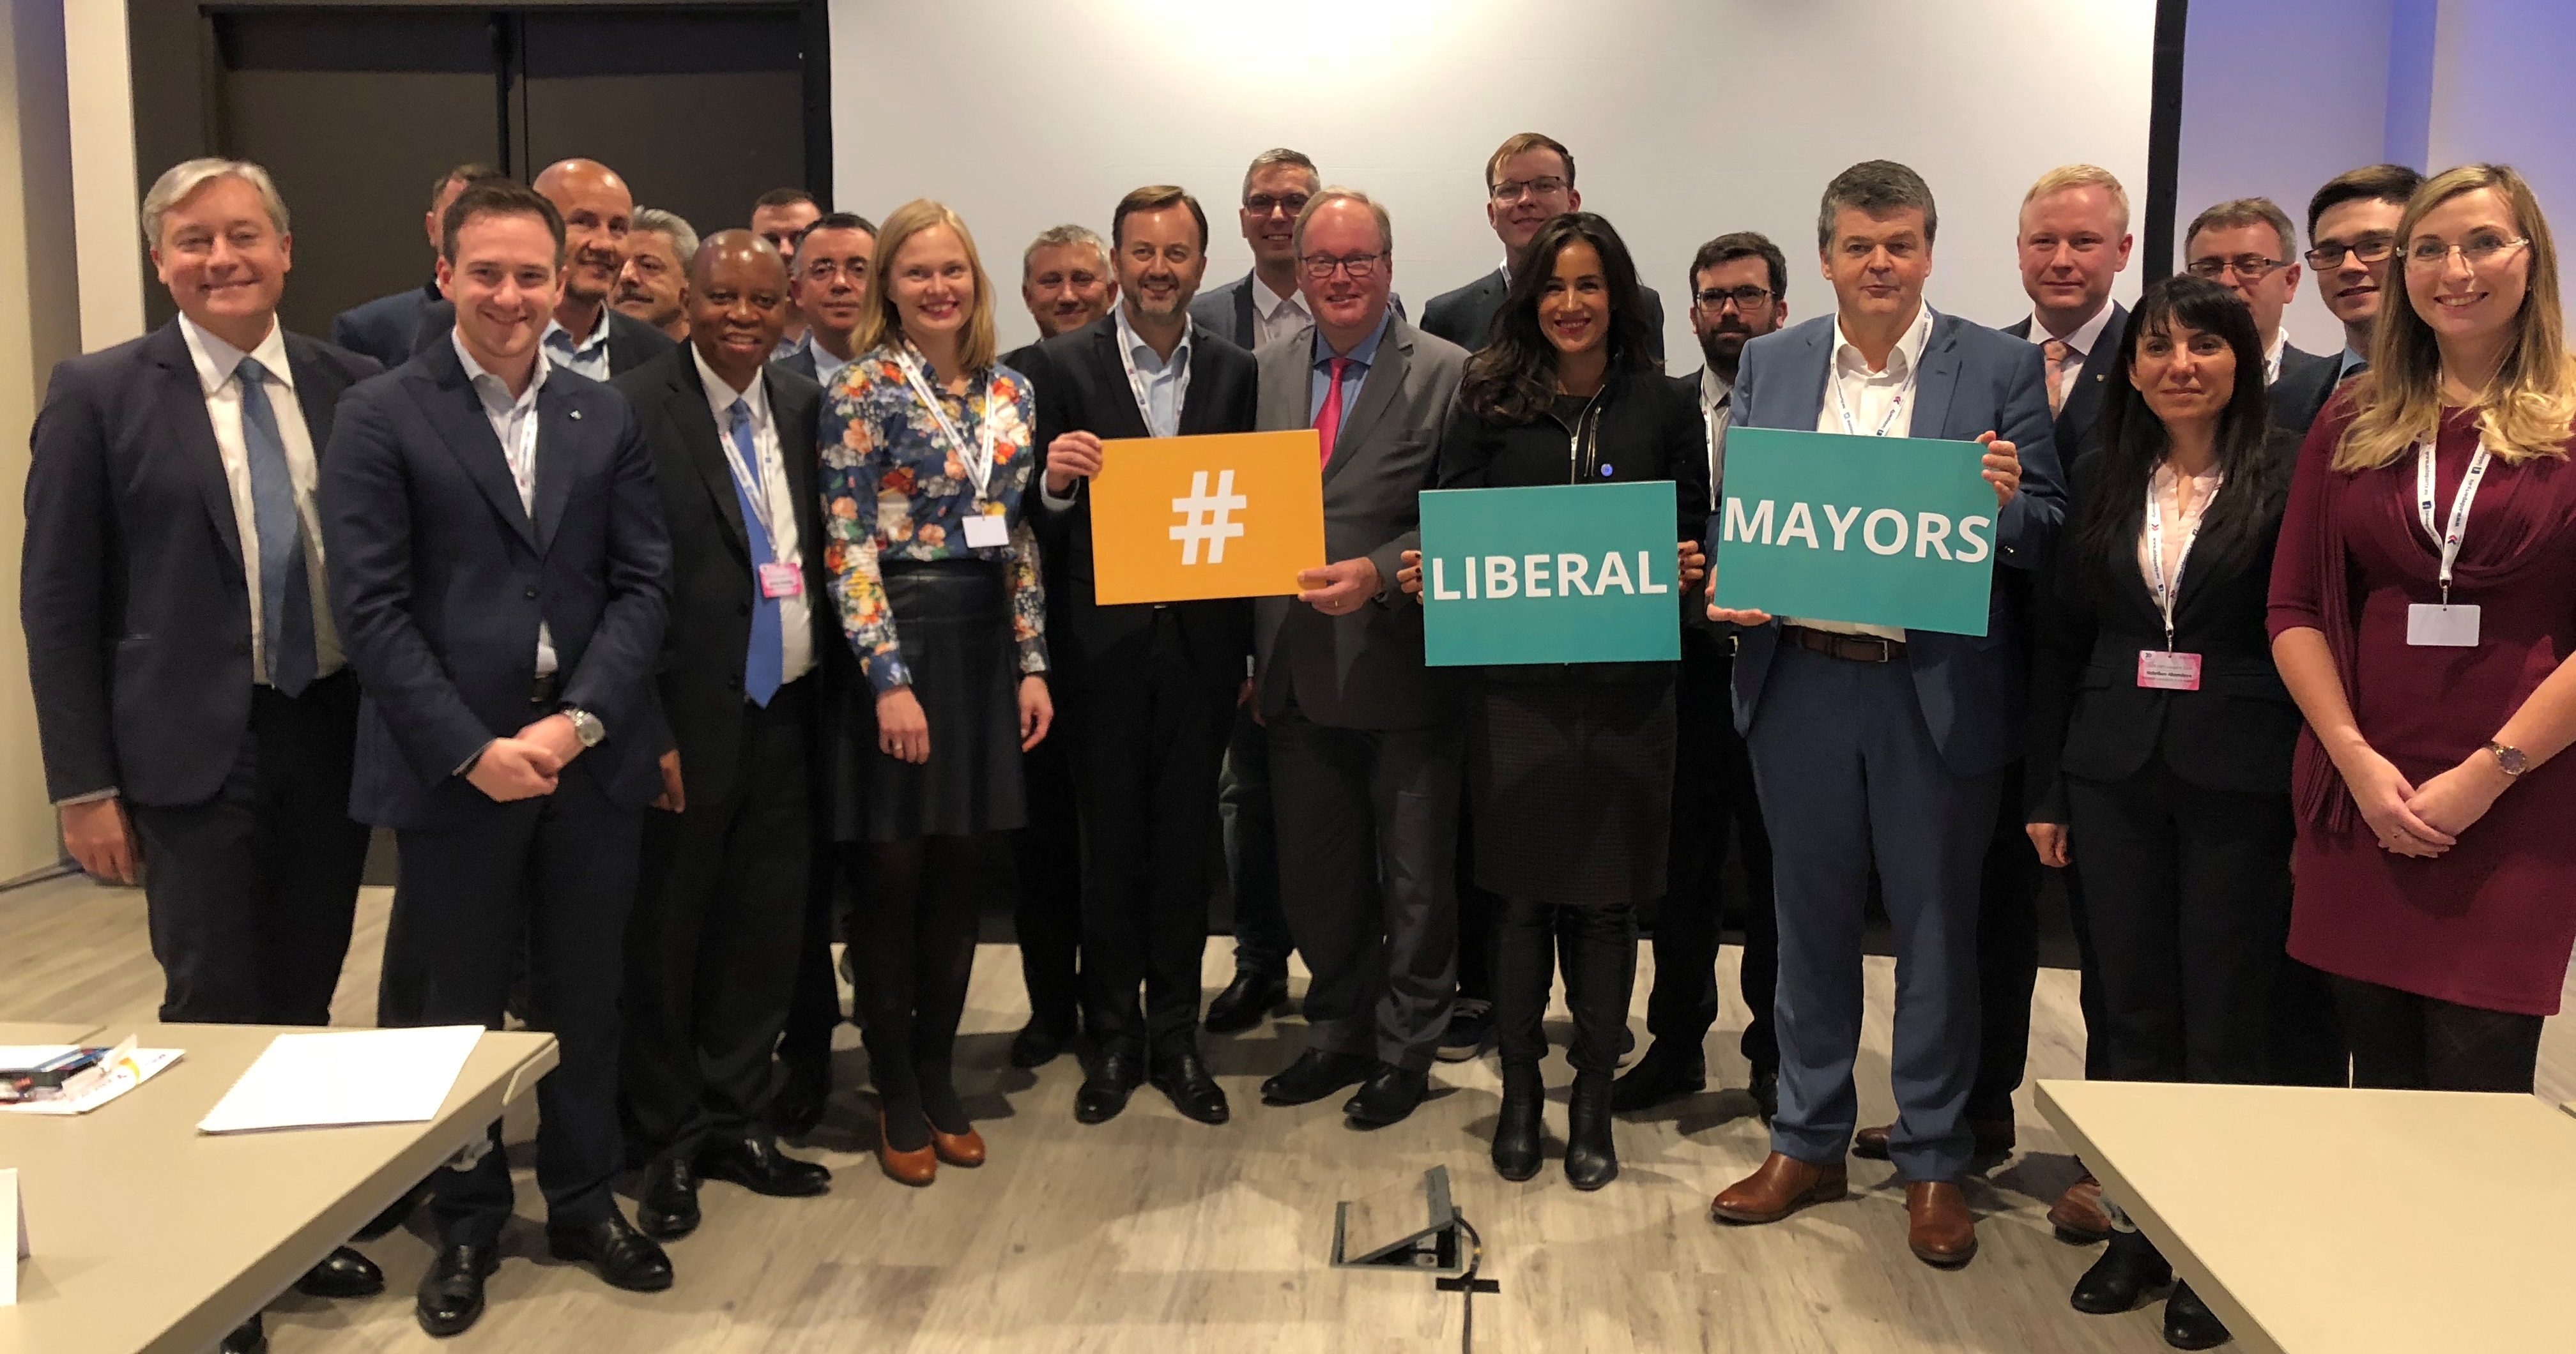 Liberal Mayors take action to protect democracy